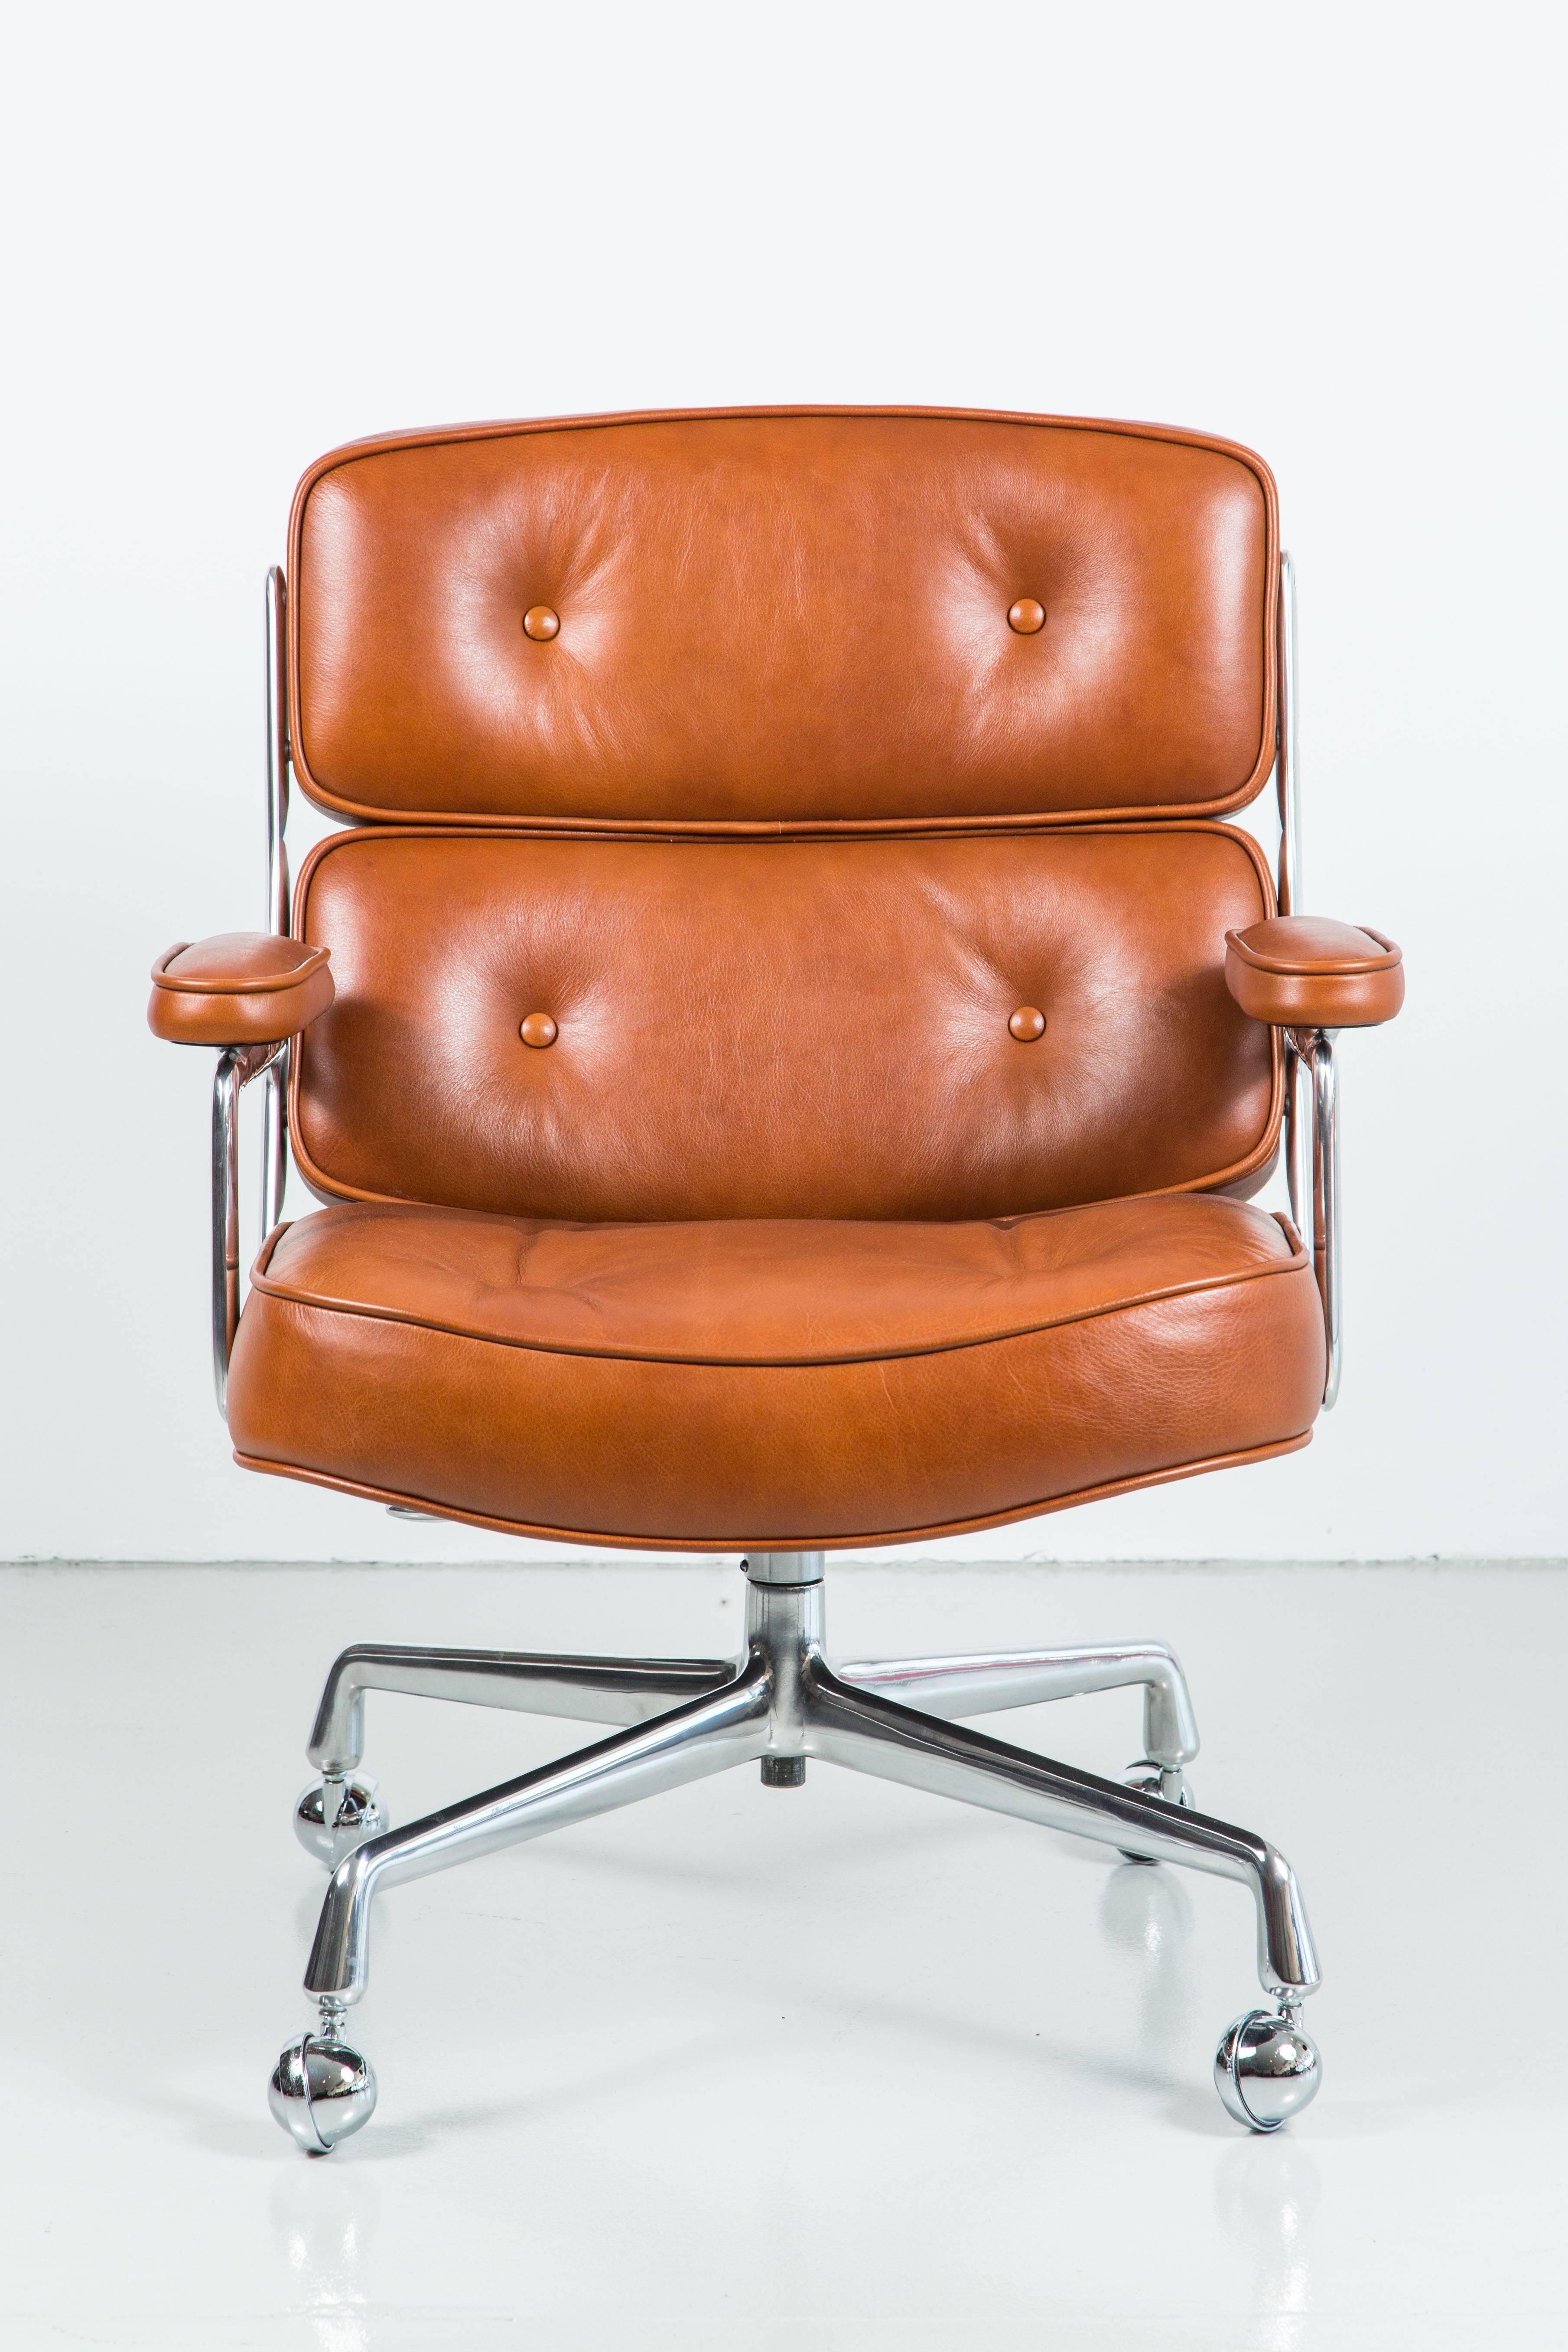 Classic office chair from the Time Life building in New York. New caramel leather upholstery along with newly polished aluminum base. Chair has an adjustable height with tilt and swivel. Multiple chairs available. Can be COL or COM.